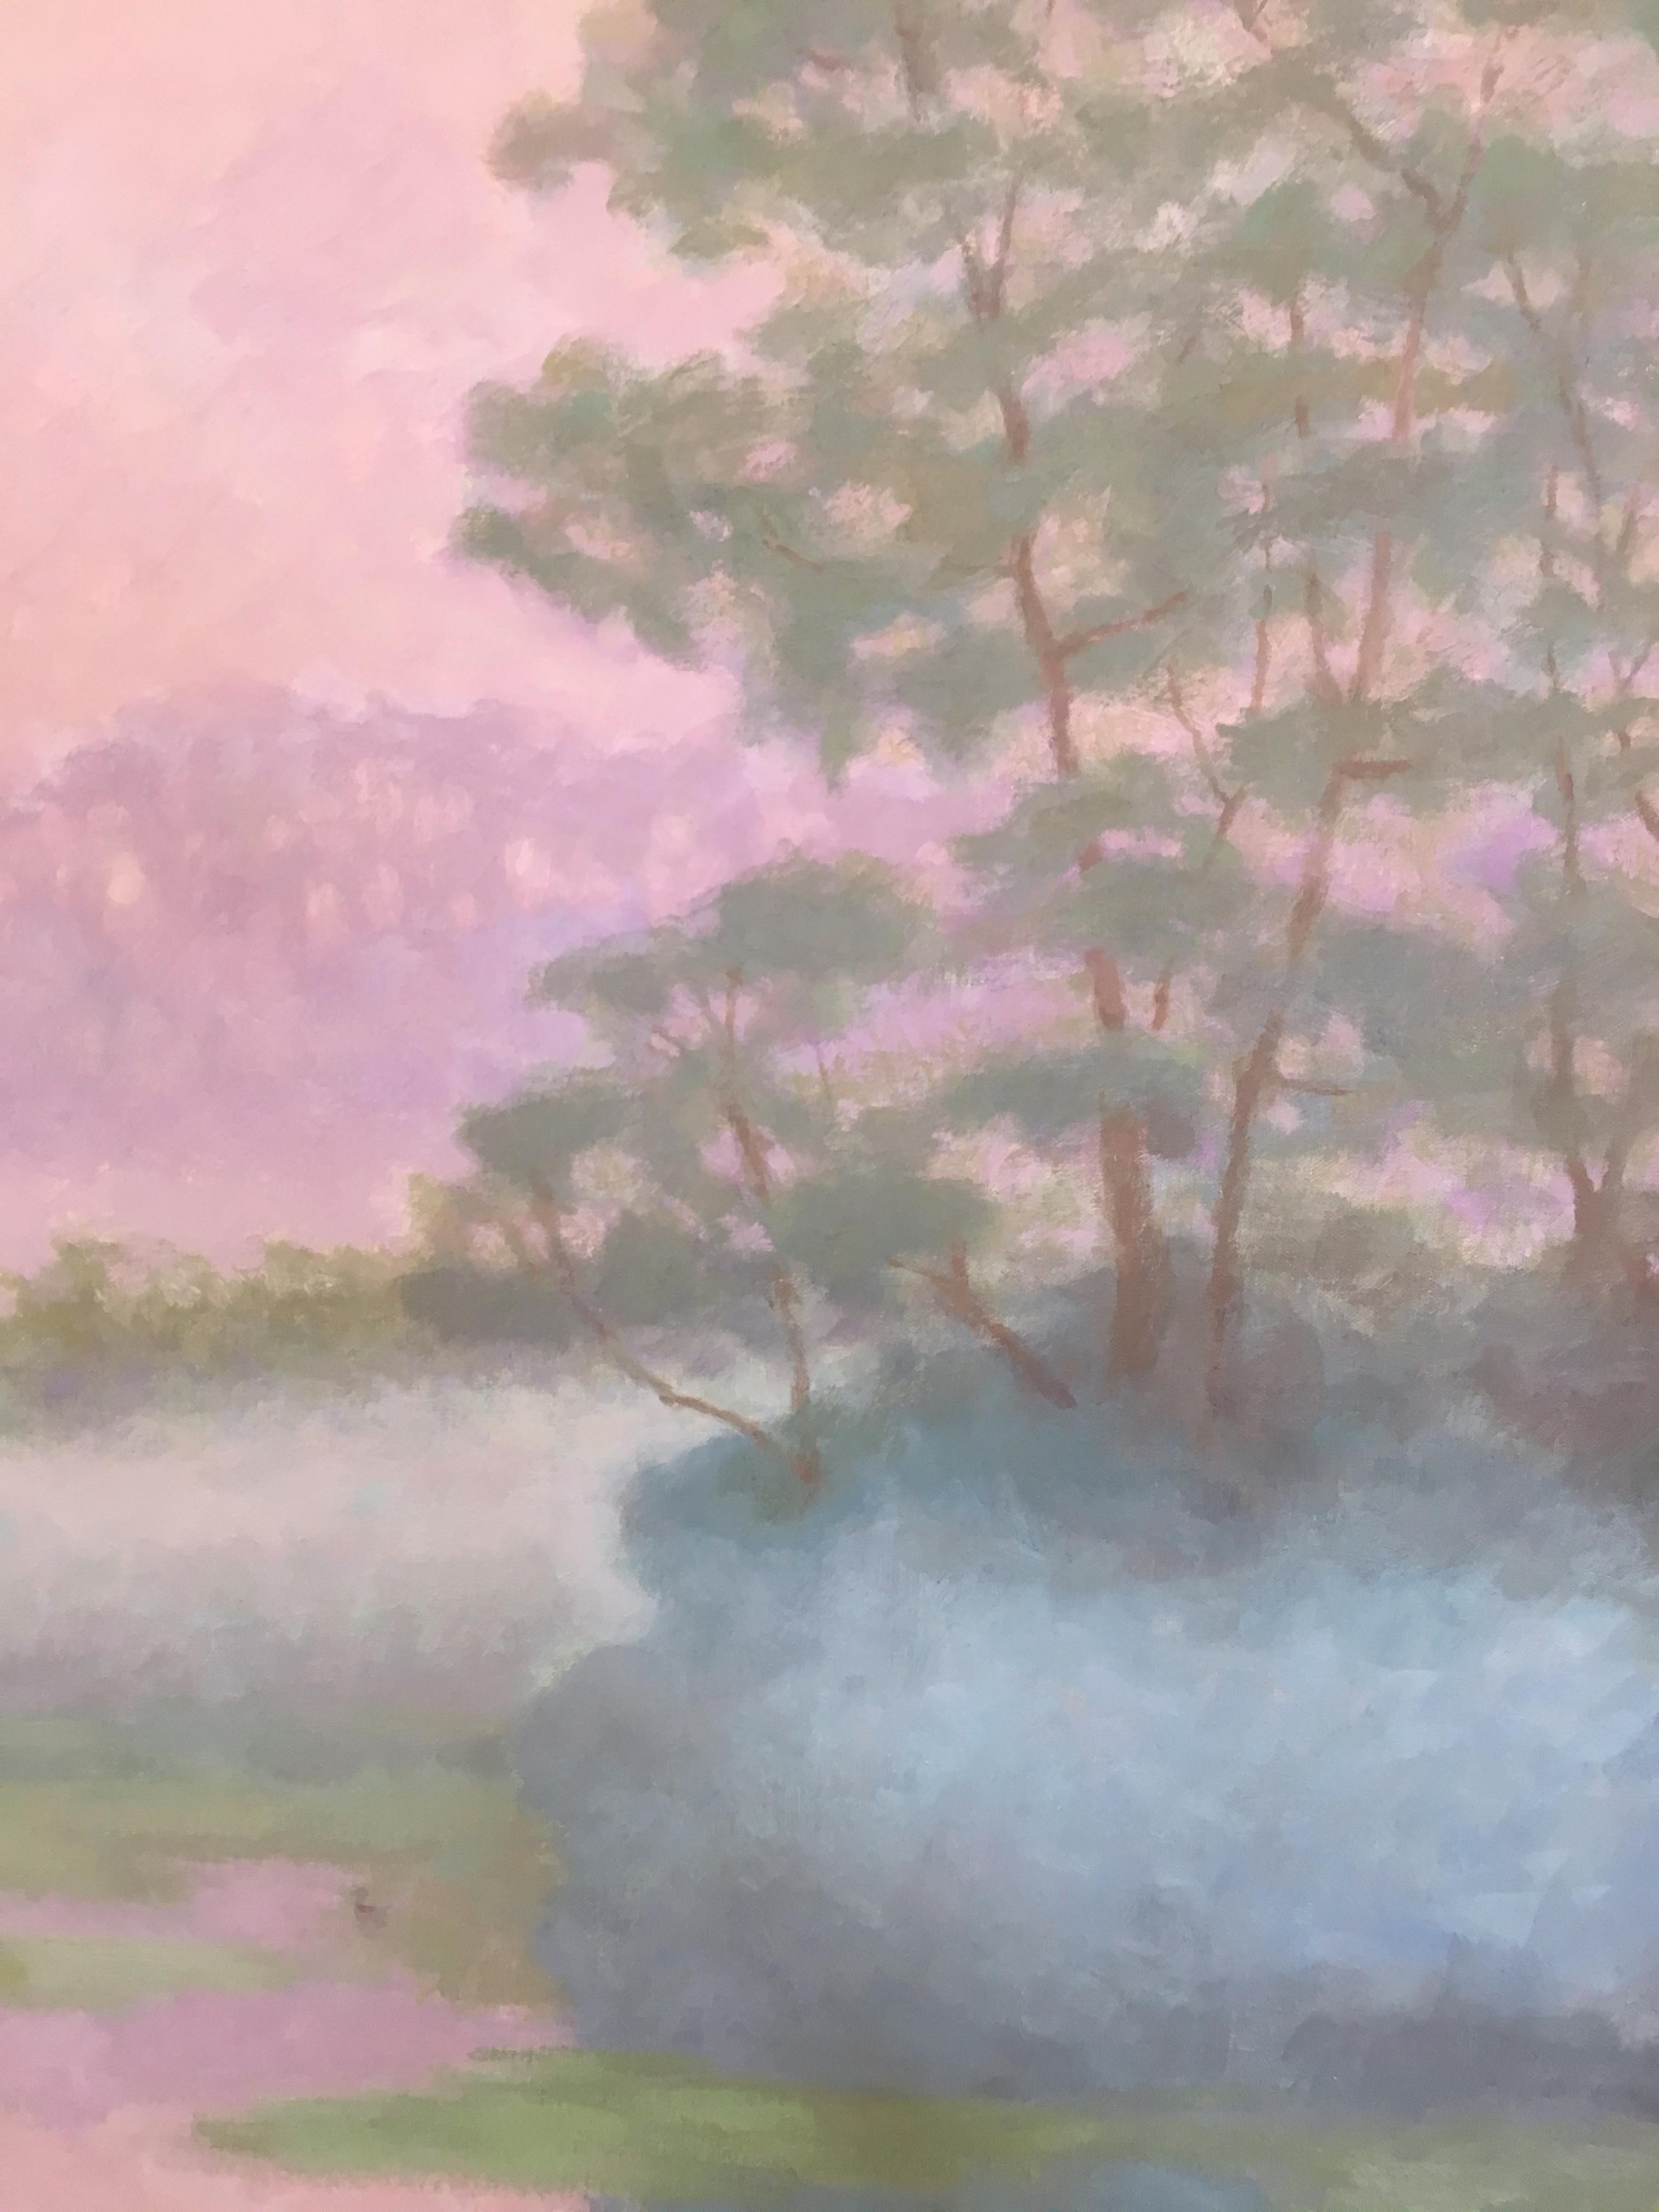 Landscape, nature, pond, water, forest, trees, mist, fog, magenta, lavender, pink, orange, purple, red, blue, green, fog, ducks, soft, pastel, sunset, dusk. Akin to Claude Monet water lilies.

Rob Longley's training as an artist began when he first